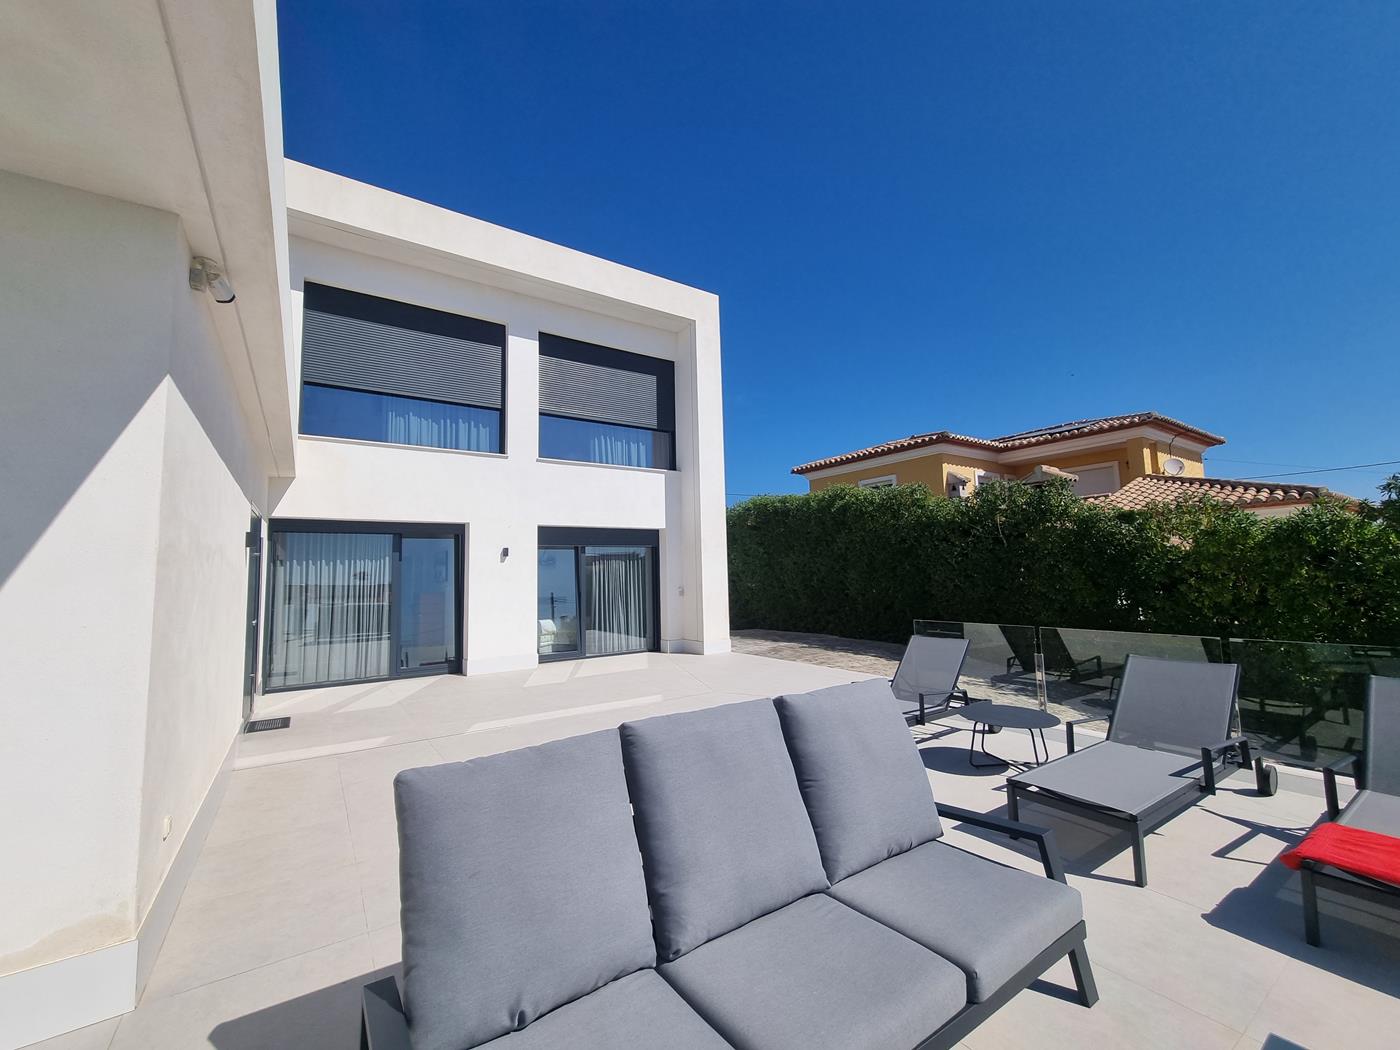 Fotogalería - 70 - Exceptional homes in the Costa Blanca. Unparalleled Service. Exceptional properties in the Costa Blanca